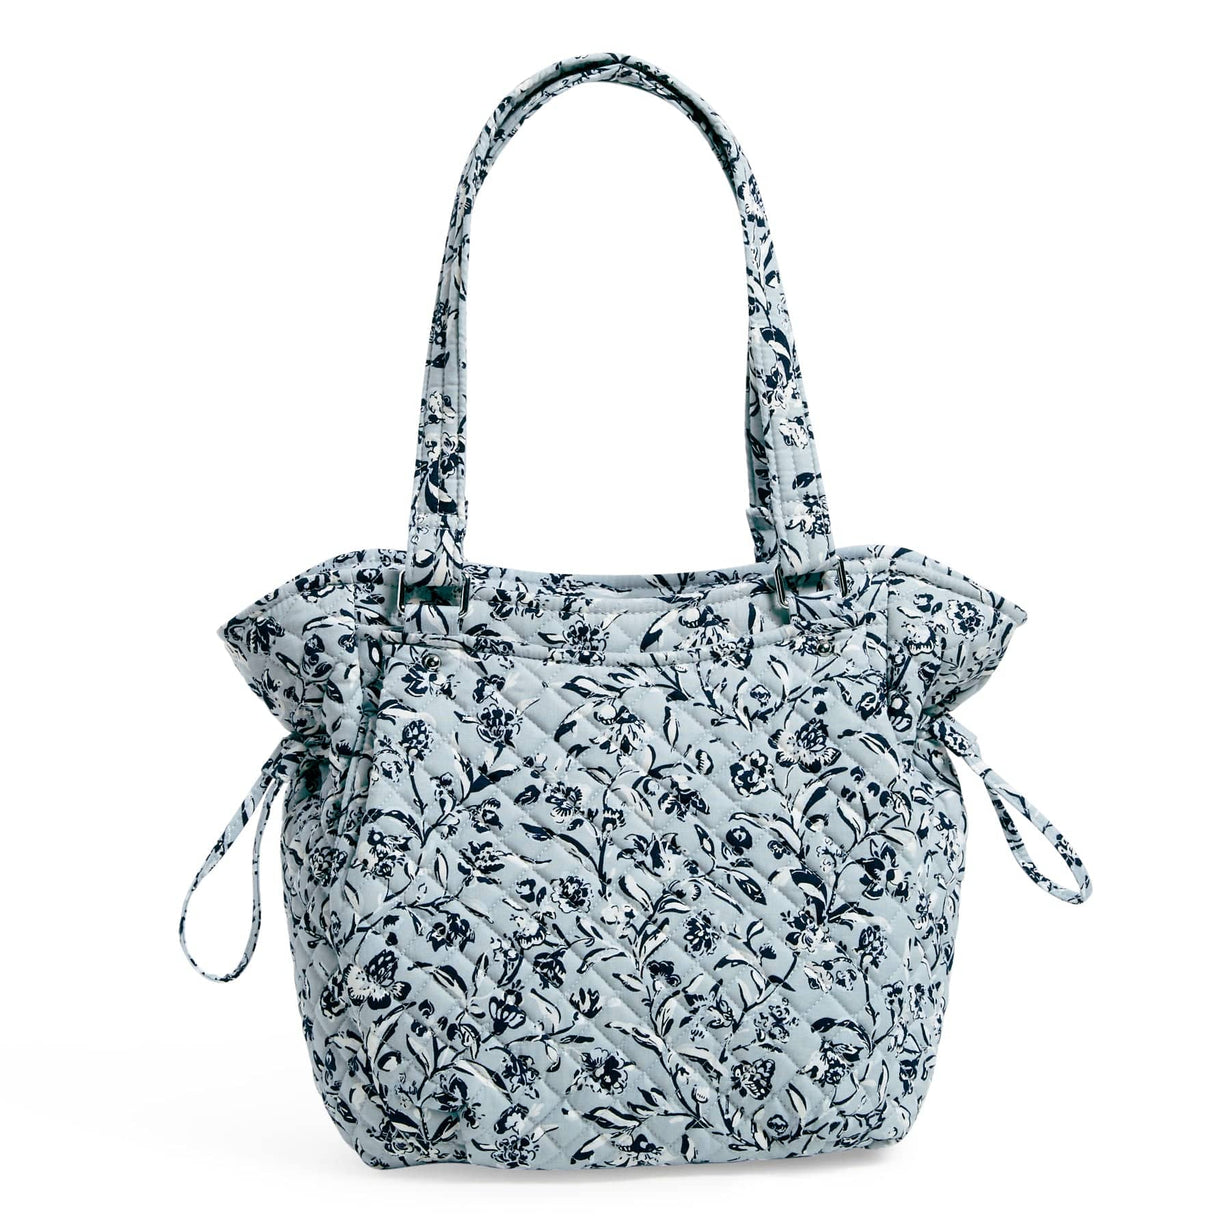 Tote & Beach Bags for Women | Kate Spade Outlet